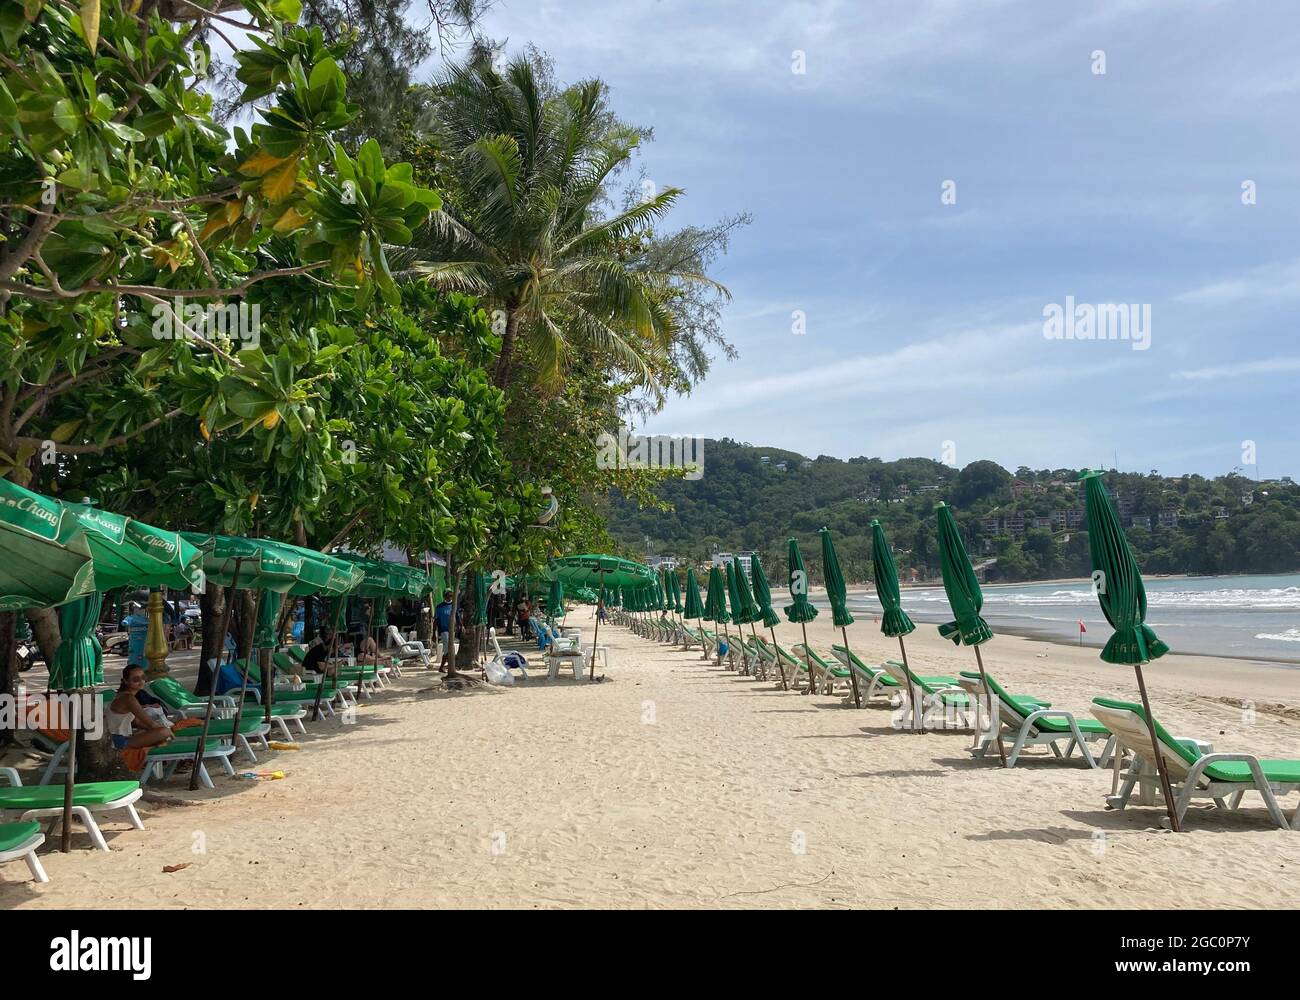 Phuket, Thailand. 06th Aug, 2021. Tourists stay at Patong Beach as part of the model project 'Sandbox'. Phuket has been letting fully vaccinated holidaymakers onto the island quarantine-free since July 1. So far, only a few holidaymakers have come, many beaches remain empty. Credit: Carola Frentzen/dpa/Alamy Live News Stock Photo